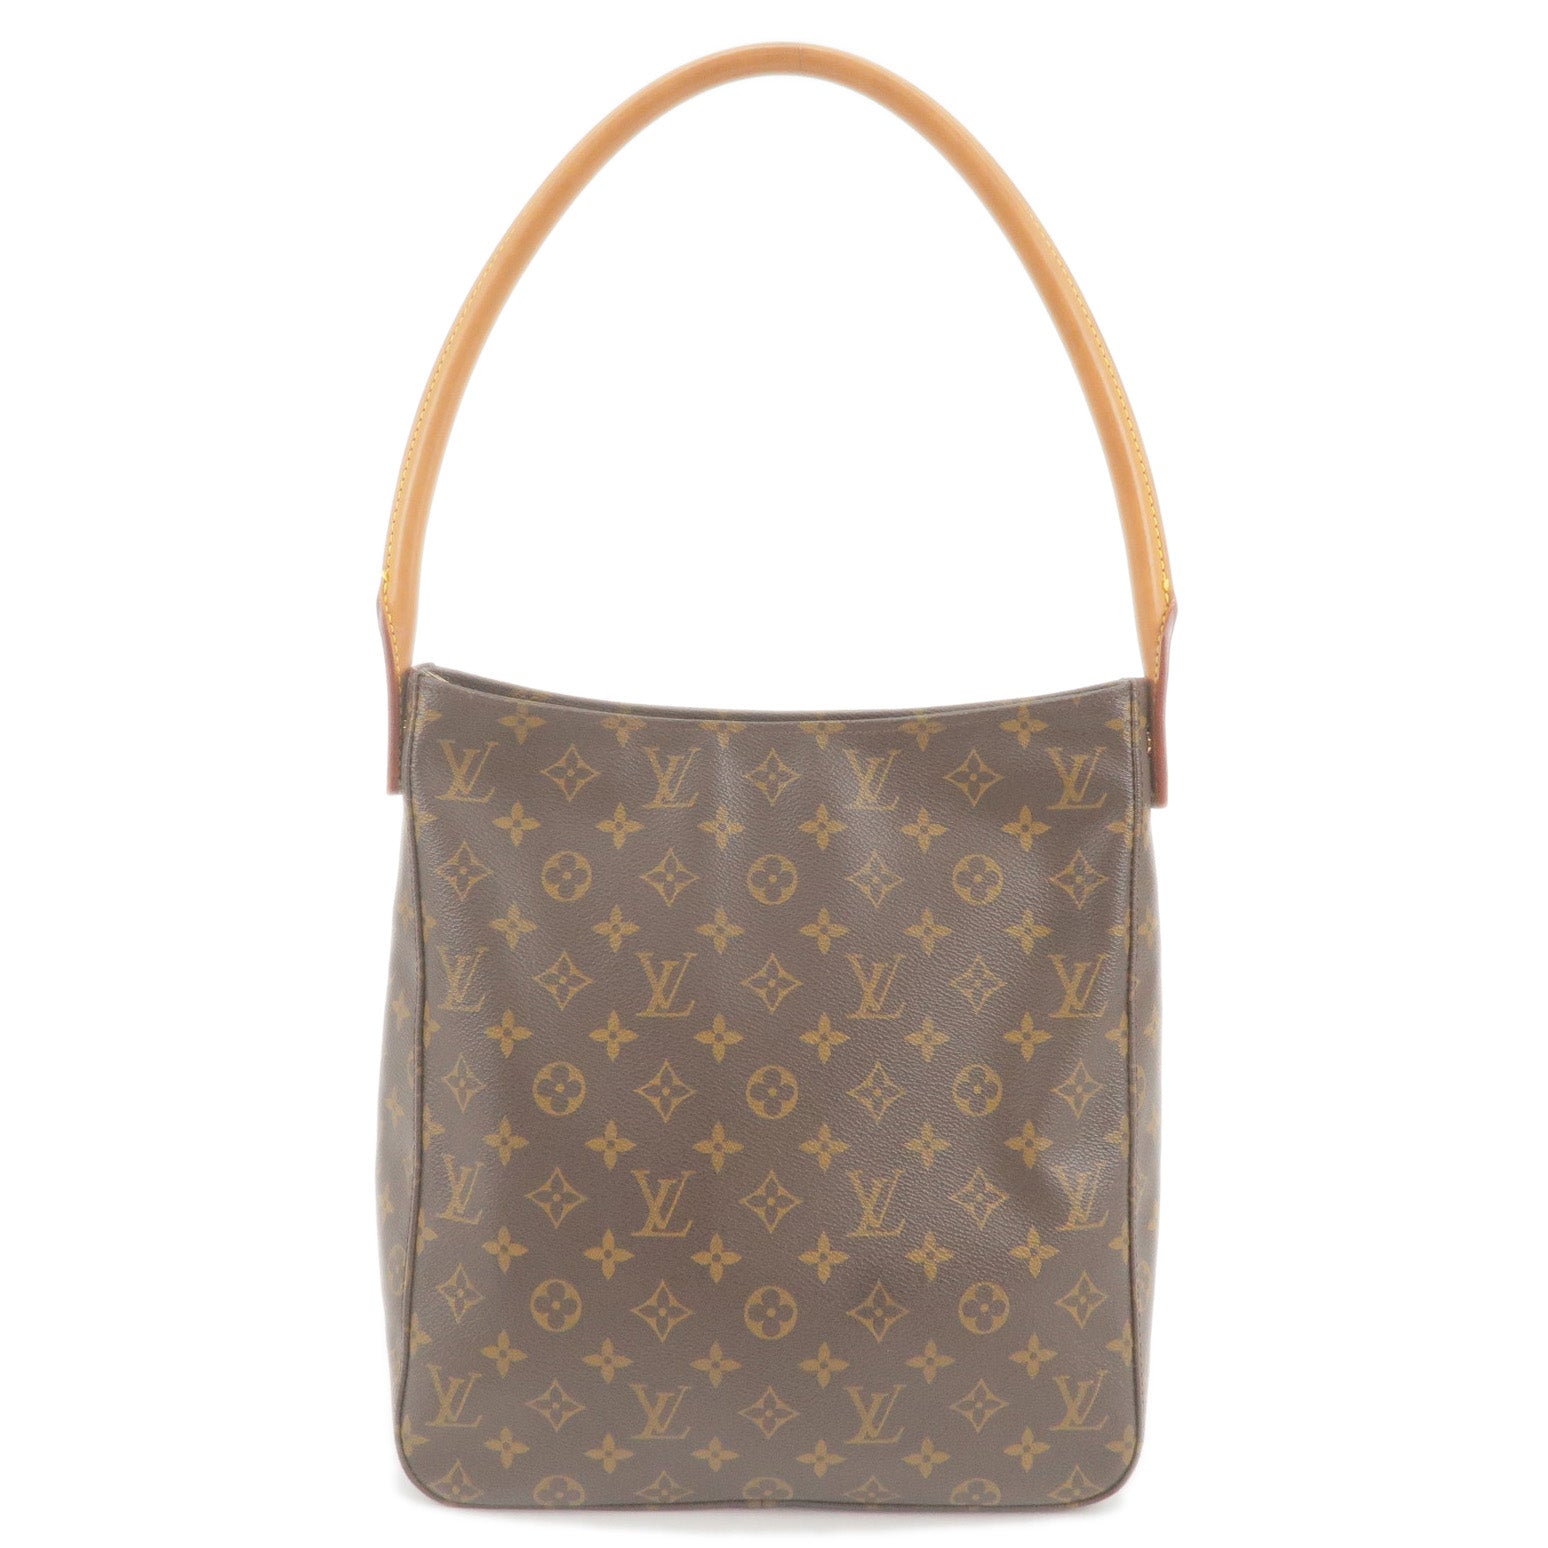 LOUIS VUITTON Authentic Monogram Looping MM Shoulder Bag Used from Japan